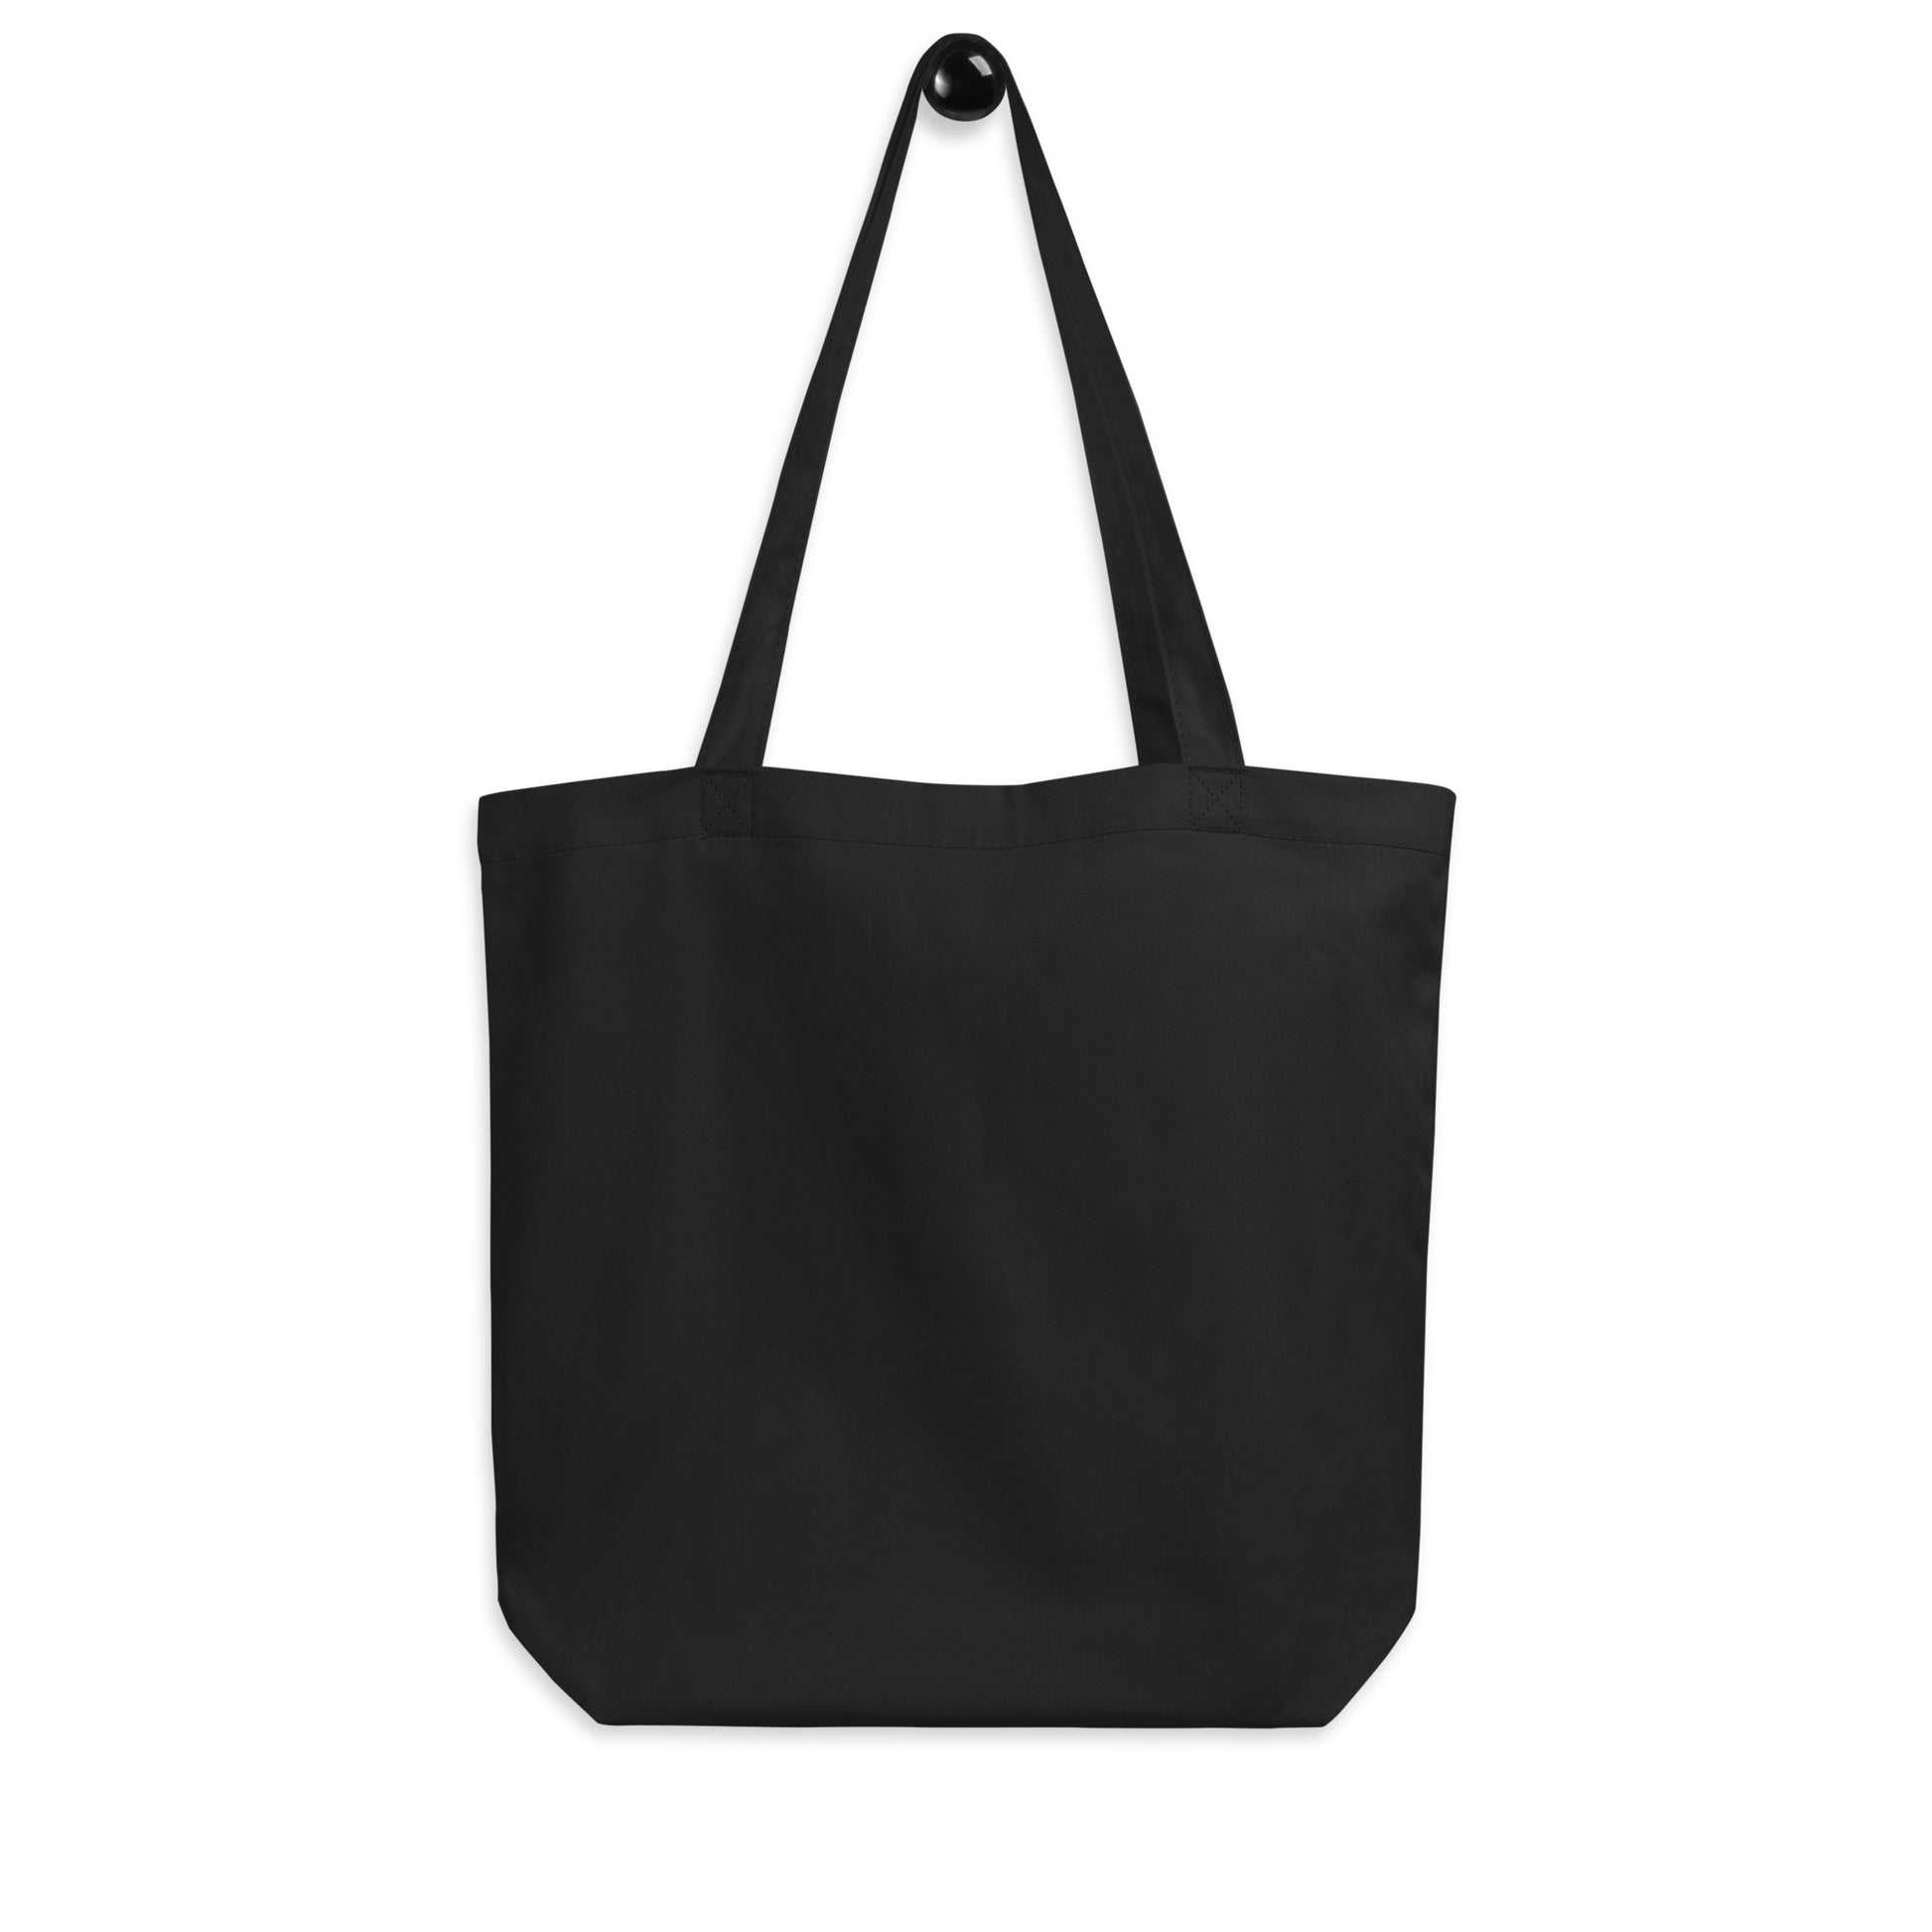 Unique Travel Gift Organic Tote - White Oval • LHR London • YHM Designs - Image 05